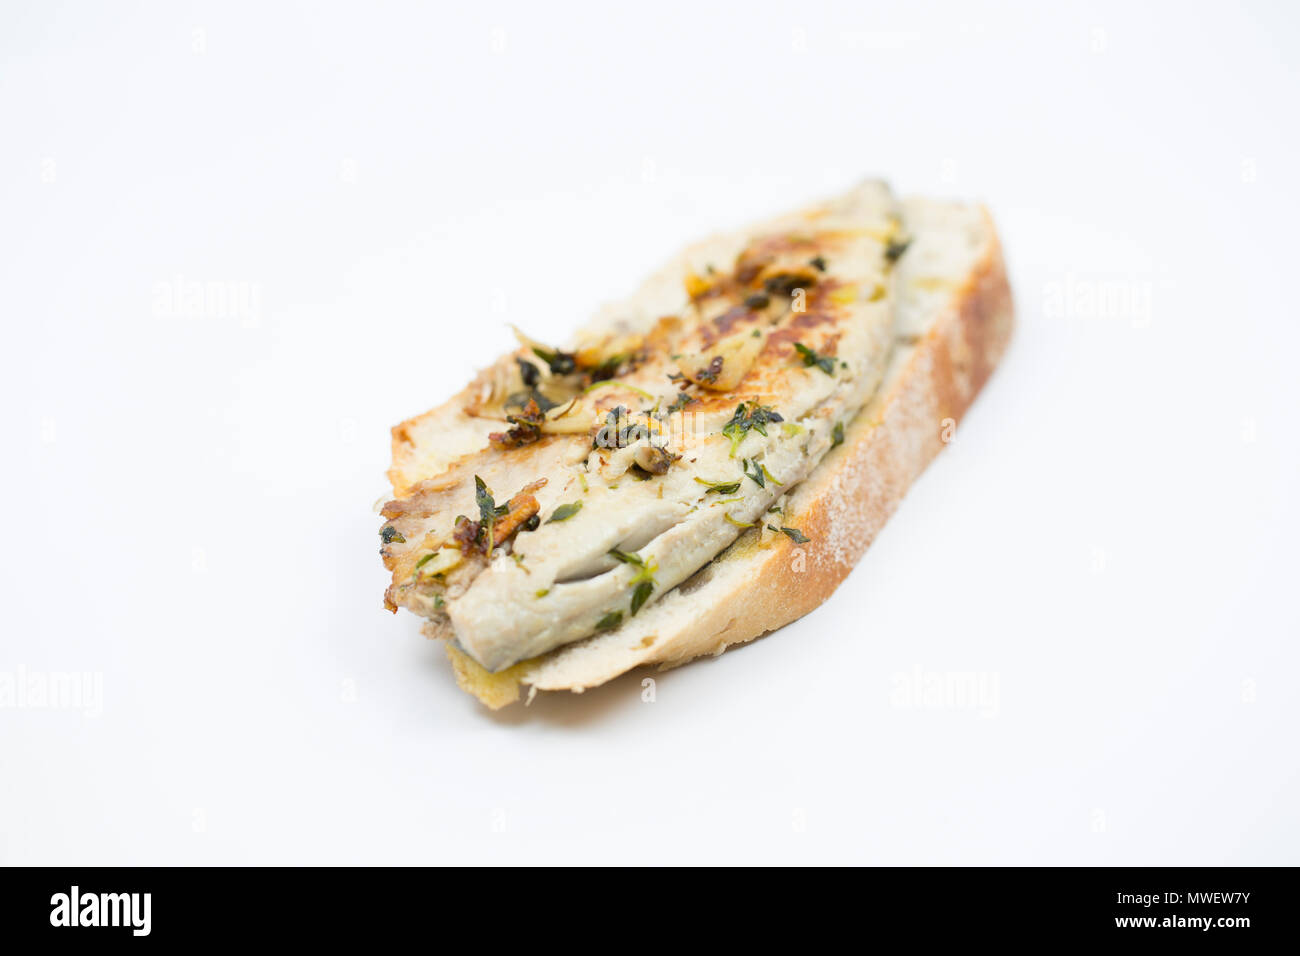 An open sandwich comprising of a mackerel fillet from a mackerel, Scomber scombrus, caught from Chesil beach in Dorset on rod and line. It has been fr Stock Photo